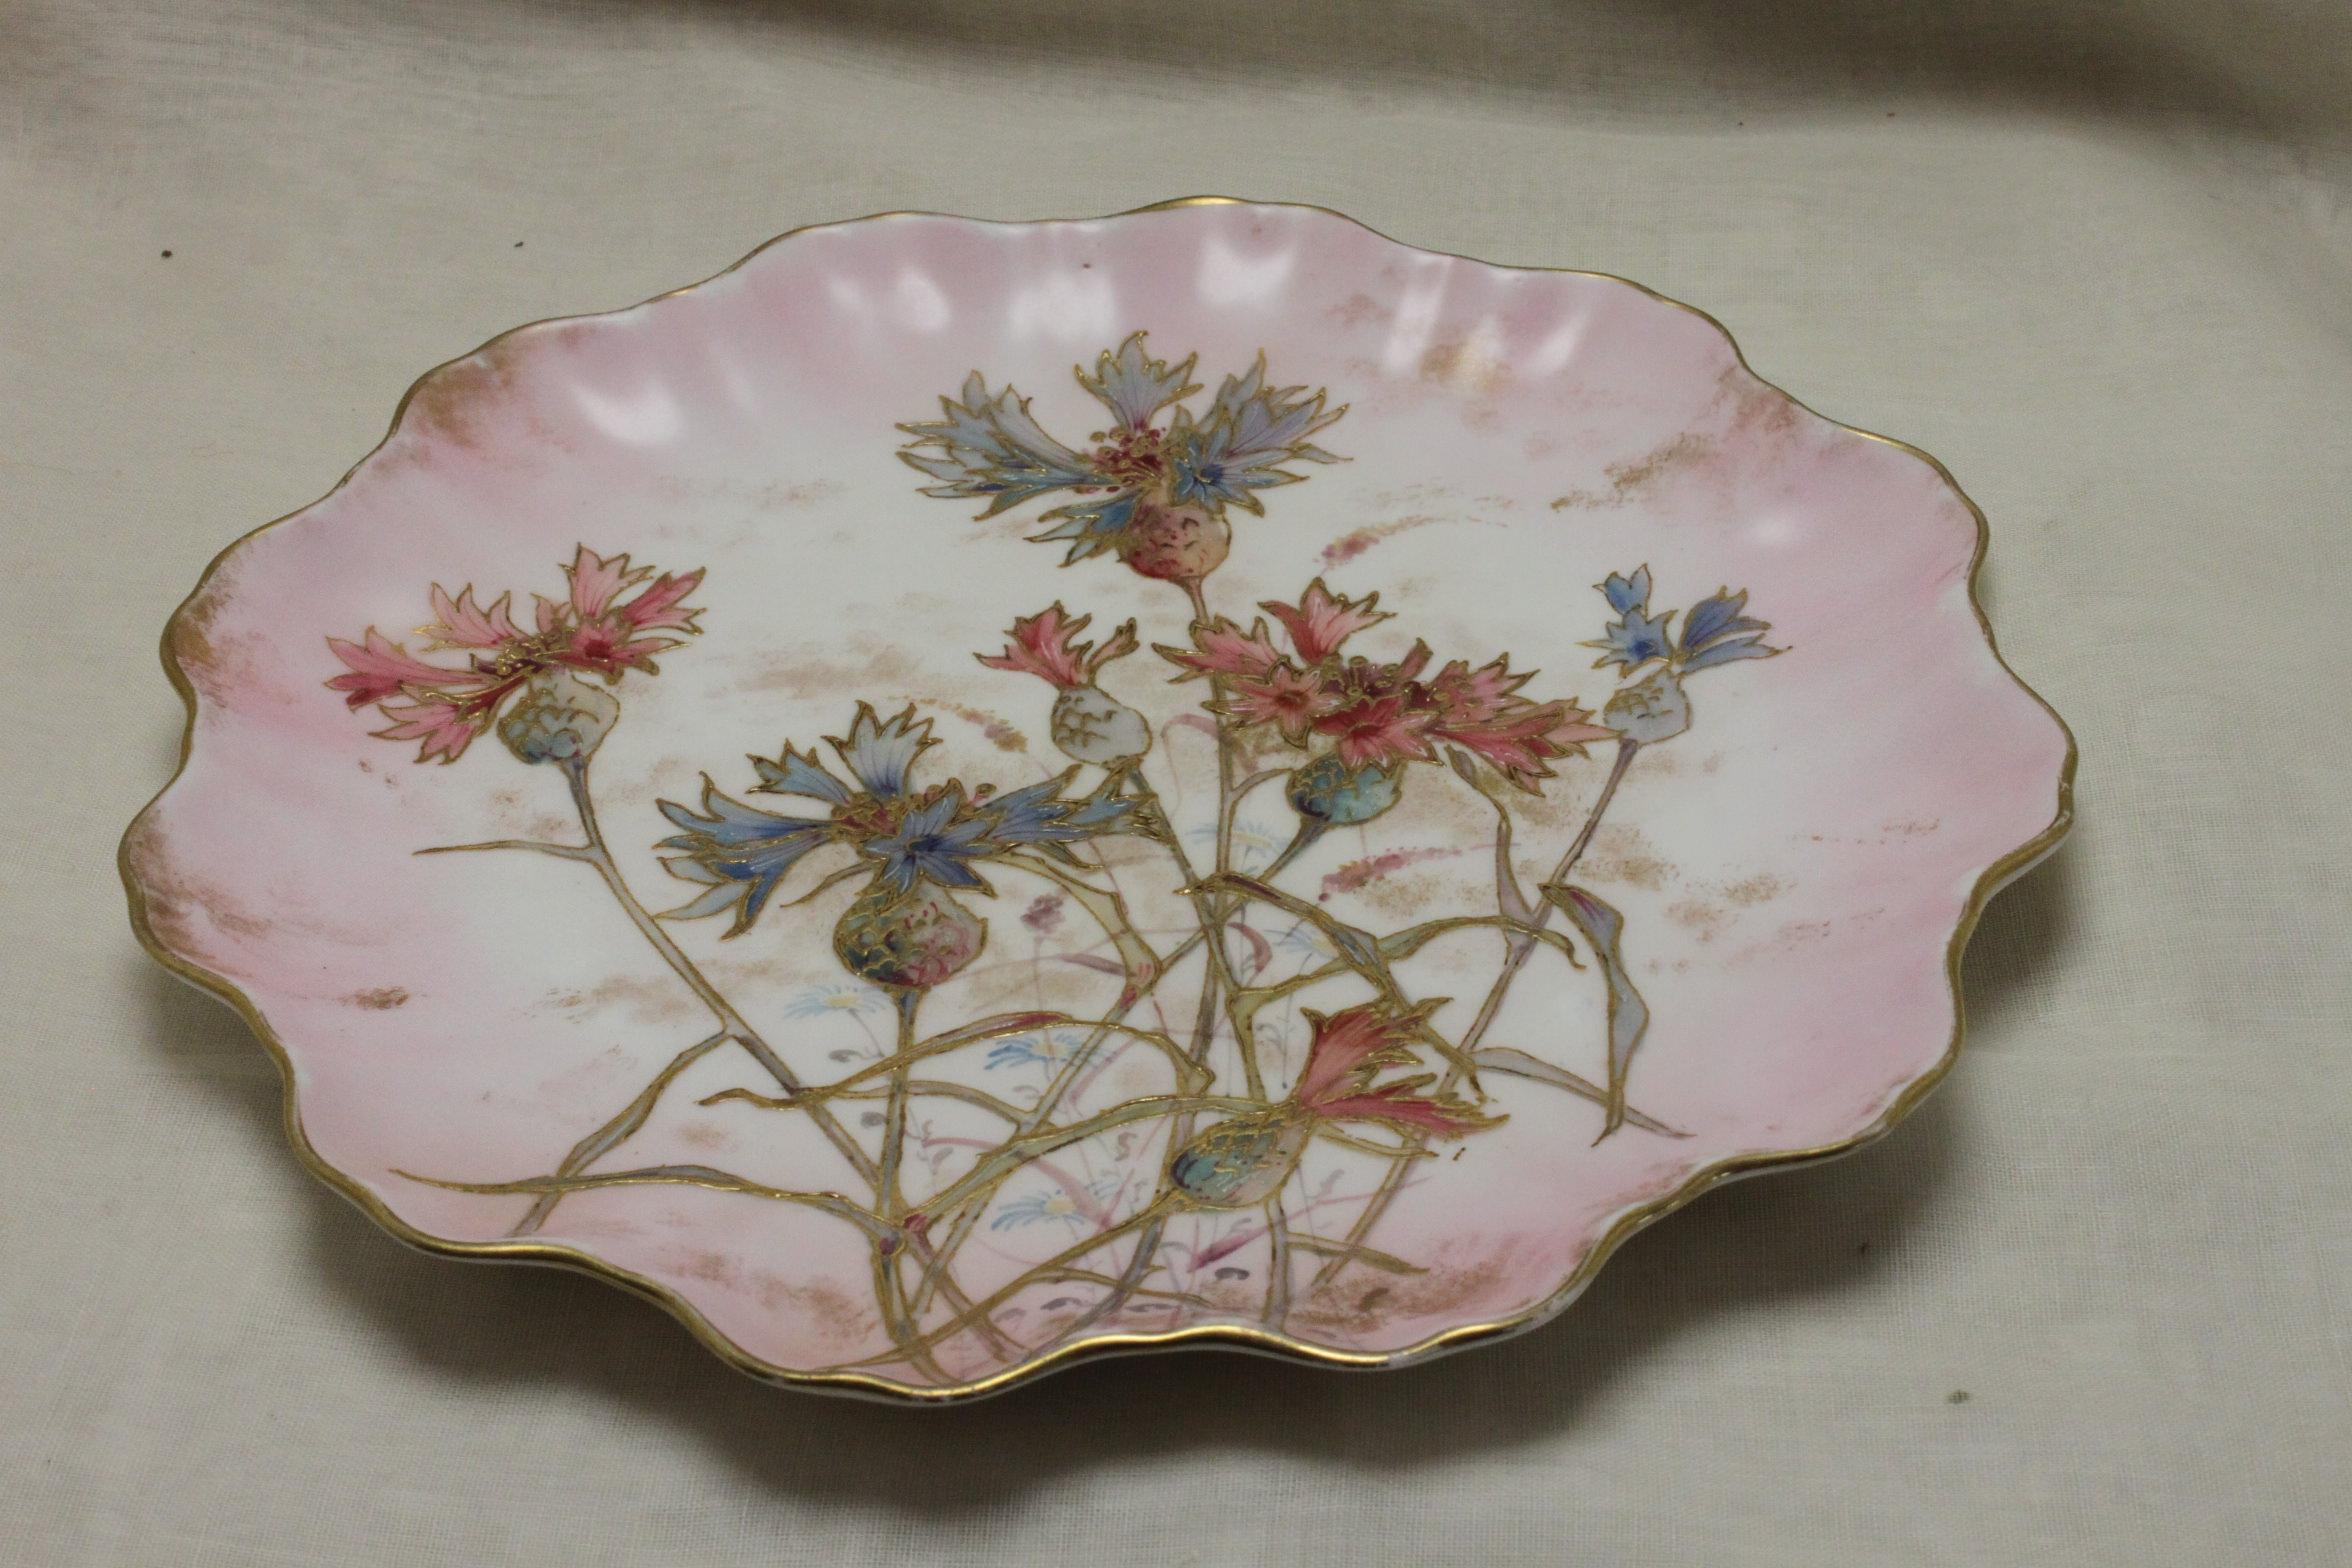 This porcelain plate from Doulton Burslem is decorated with Doulton's 